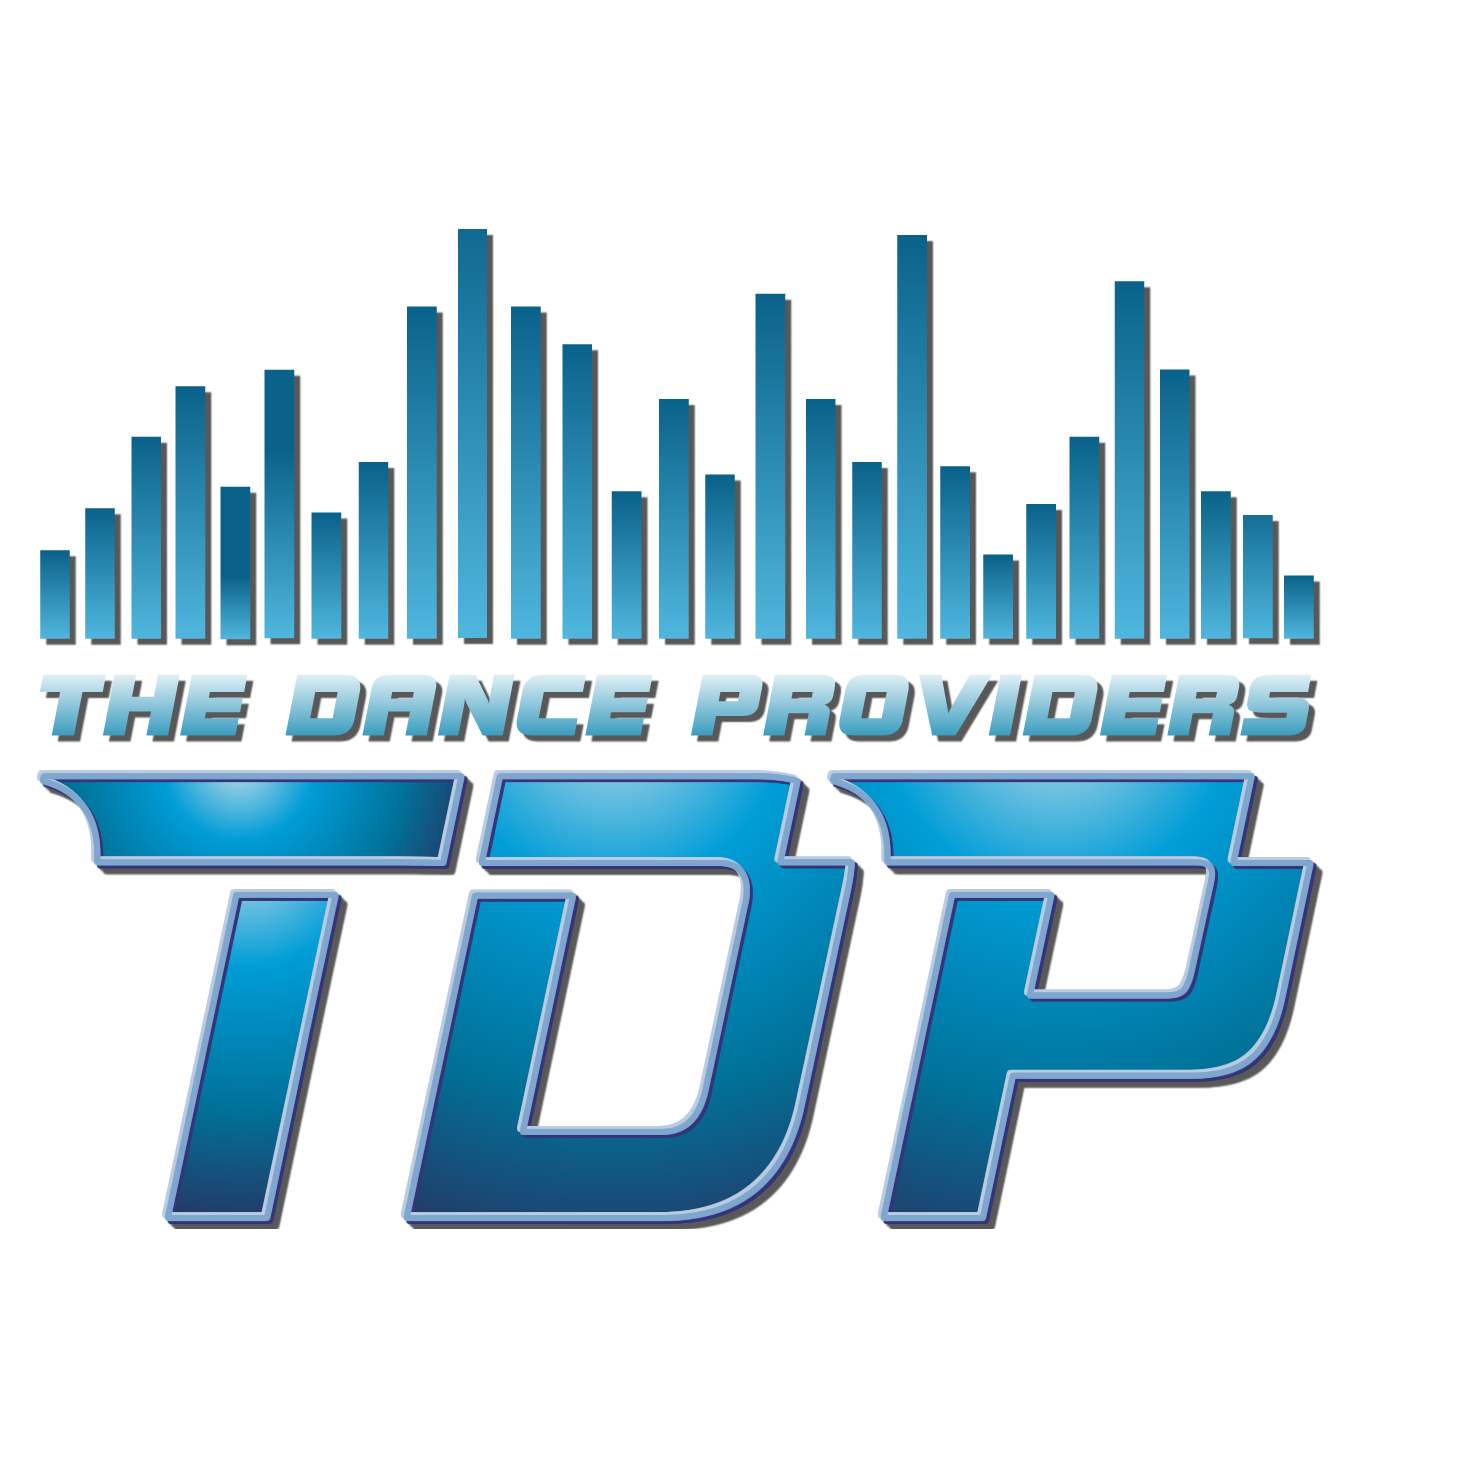 THE DANCE PROVIDERS